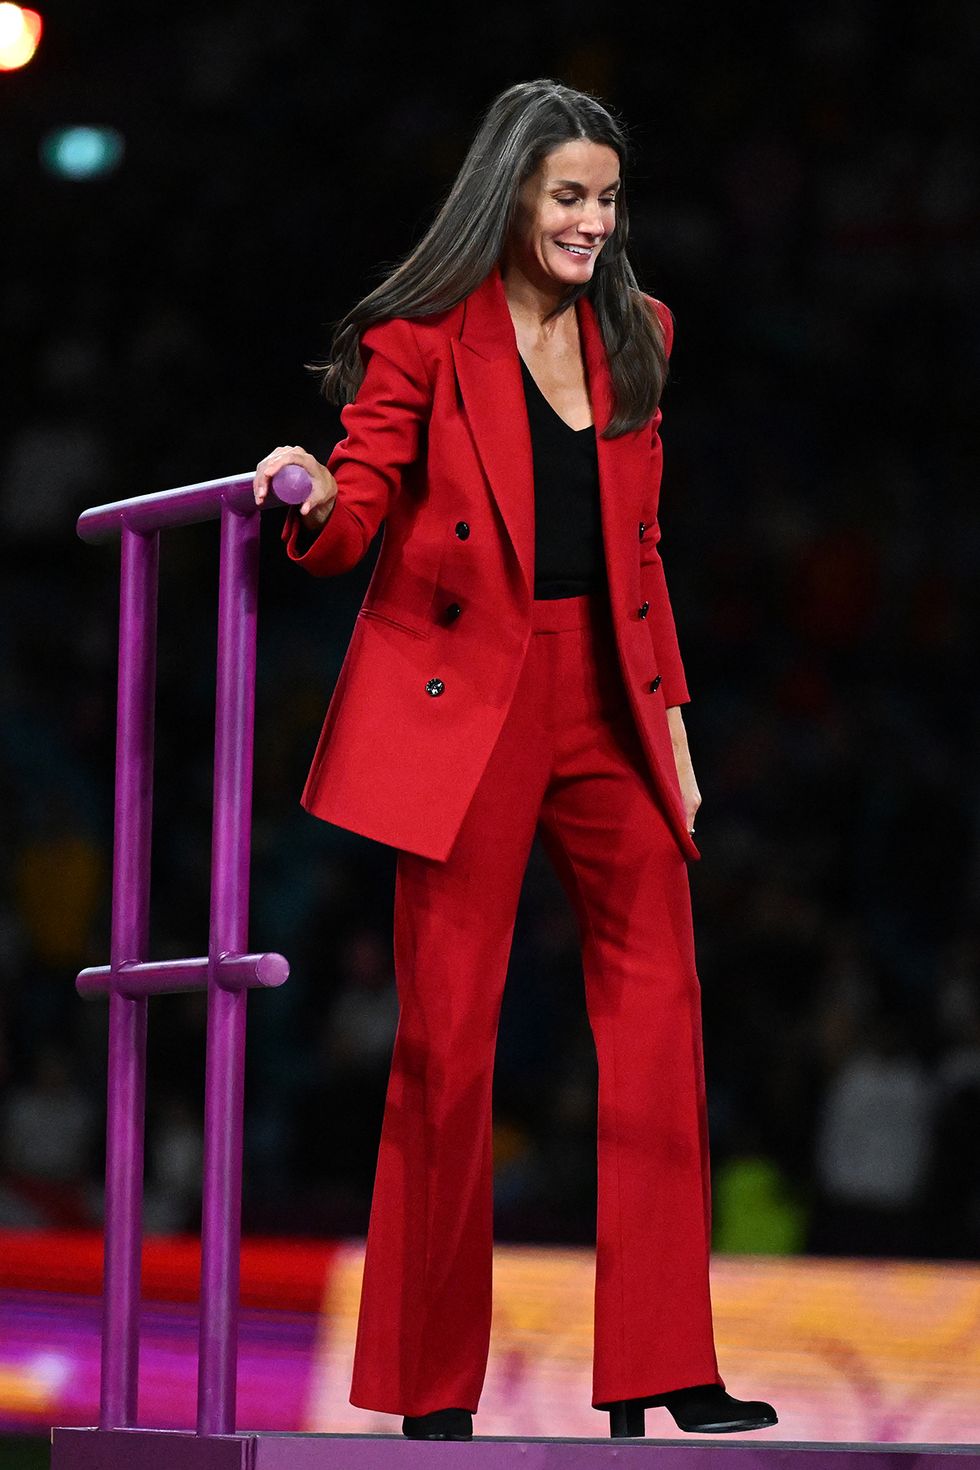 sydney, australia august 20 queen letizia of spain waves during the fifa women's world cup australia new zealand 2023 final match between spain and england at stadium australia on august 20, 2023 in sydney, australia photo by maryam majdgetty images